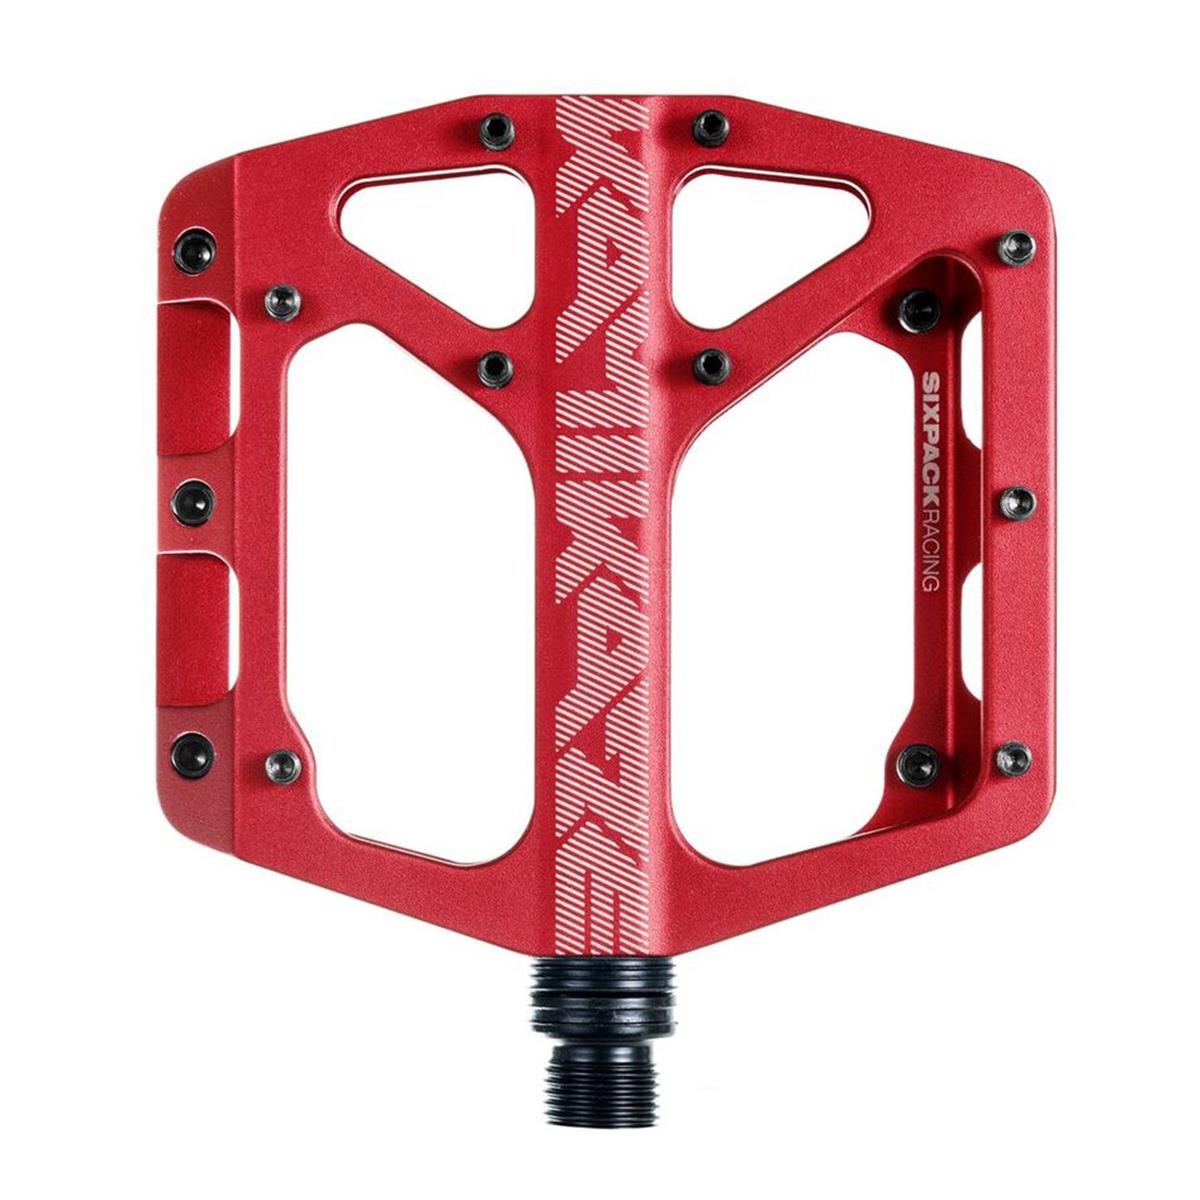 Sixpack Pedale Kamikaze 2.0 Rot, 110x110 mm, 36 M4 Pins, 1 Paar